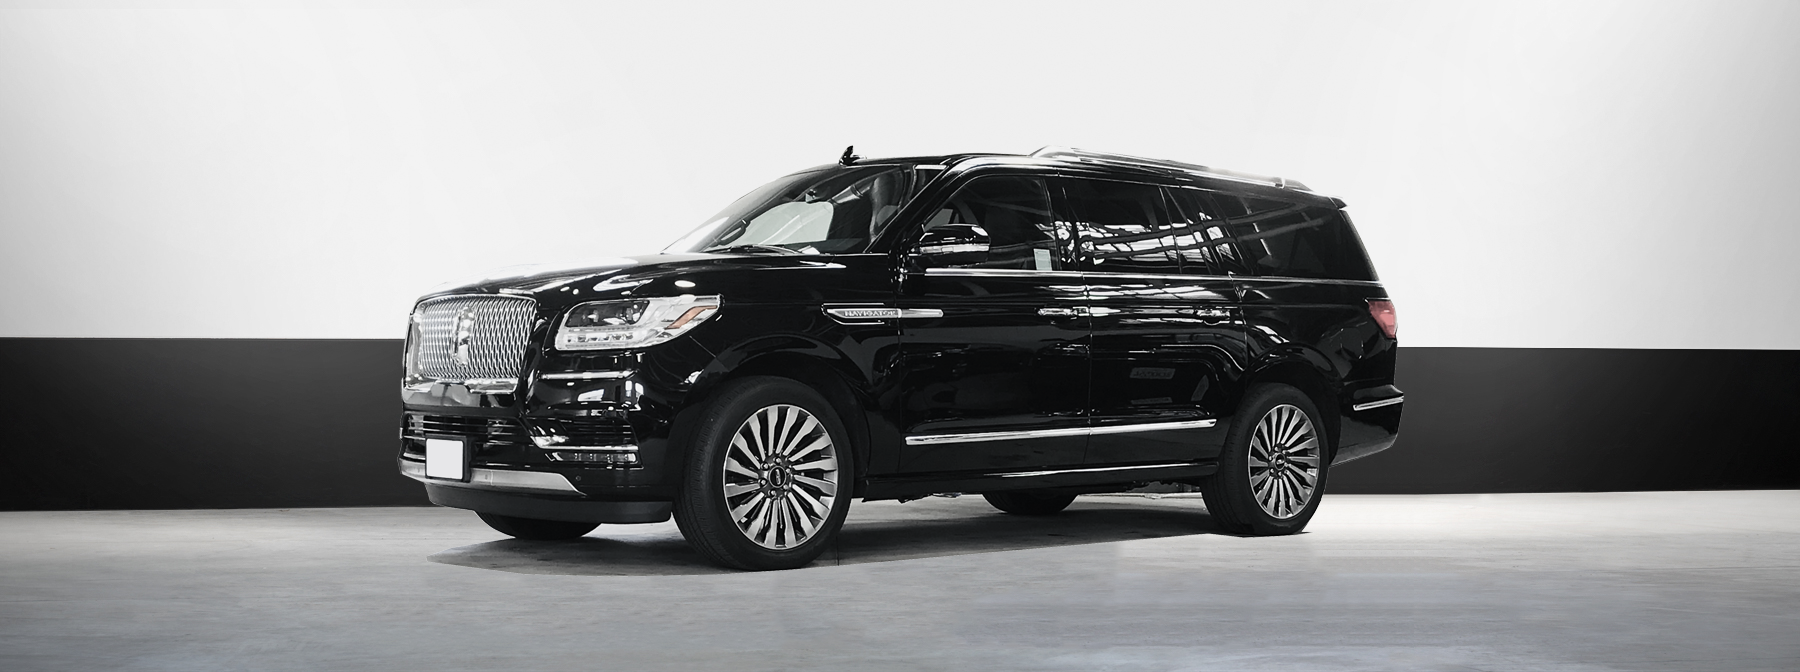 lincoln navigator in black luxury suv car rental in los angeles and san francisco